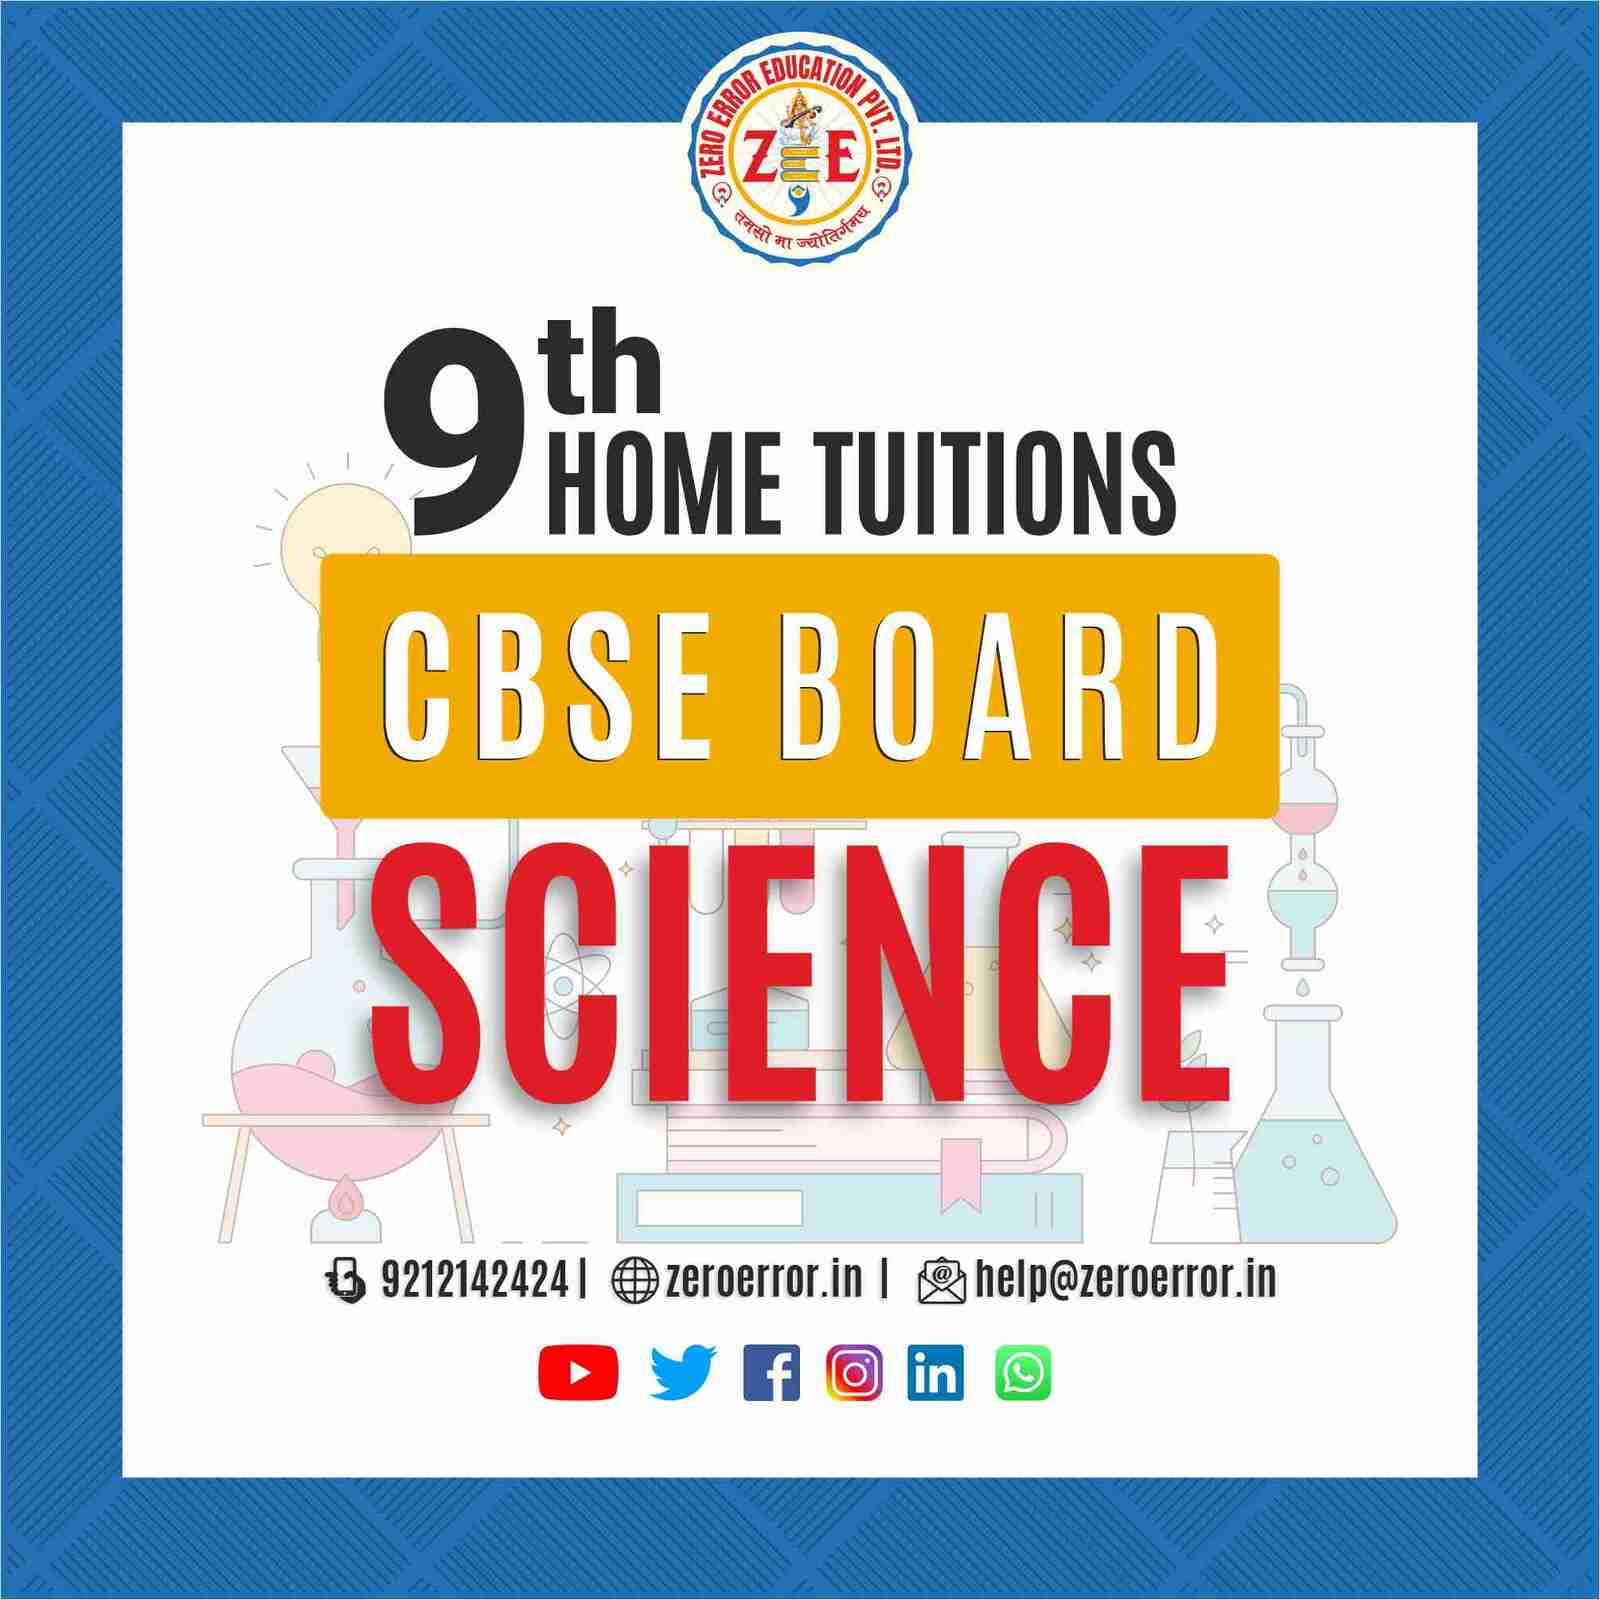 9th Grade CBSE Science Online Classes by Zero Error Education Prepare for your CBSE board exams with online and offline Science classes for 9th grade. Learn from experienced home tutors and get all the help you need to succeed. Enroll today at Zero Error Education. [https://zeroerror.in/] Call 9212142424 for more information.